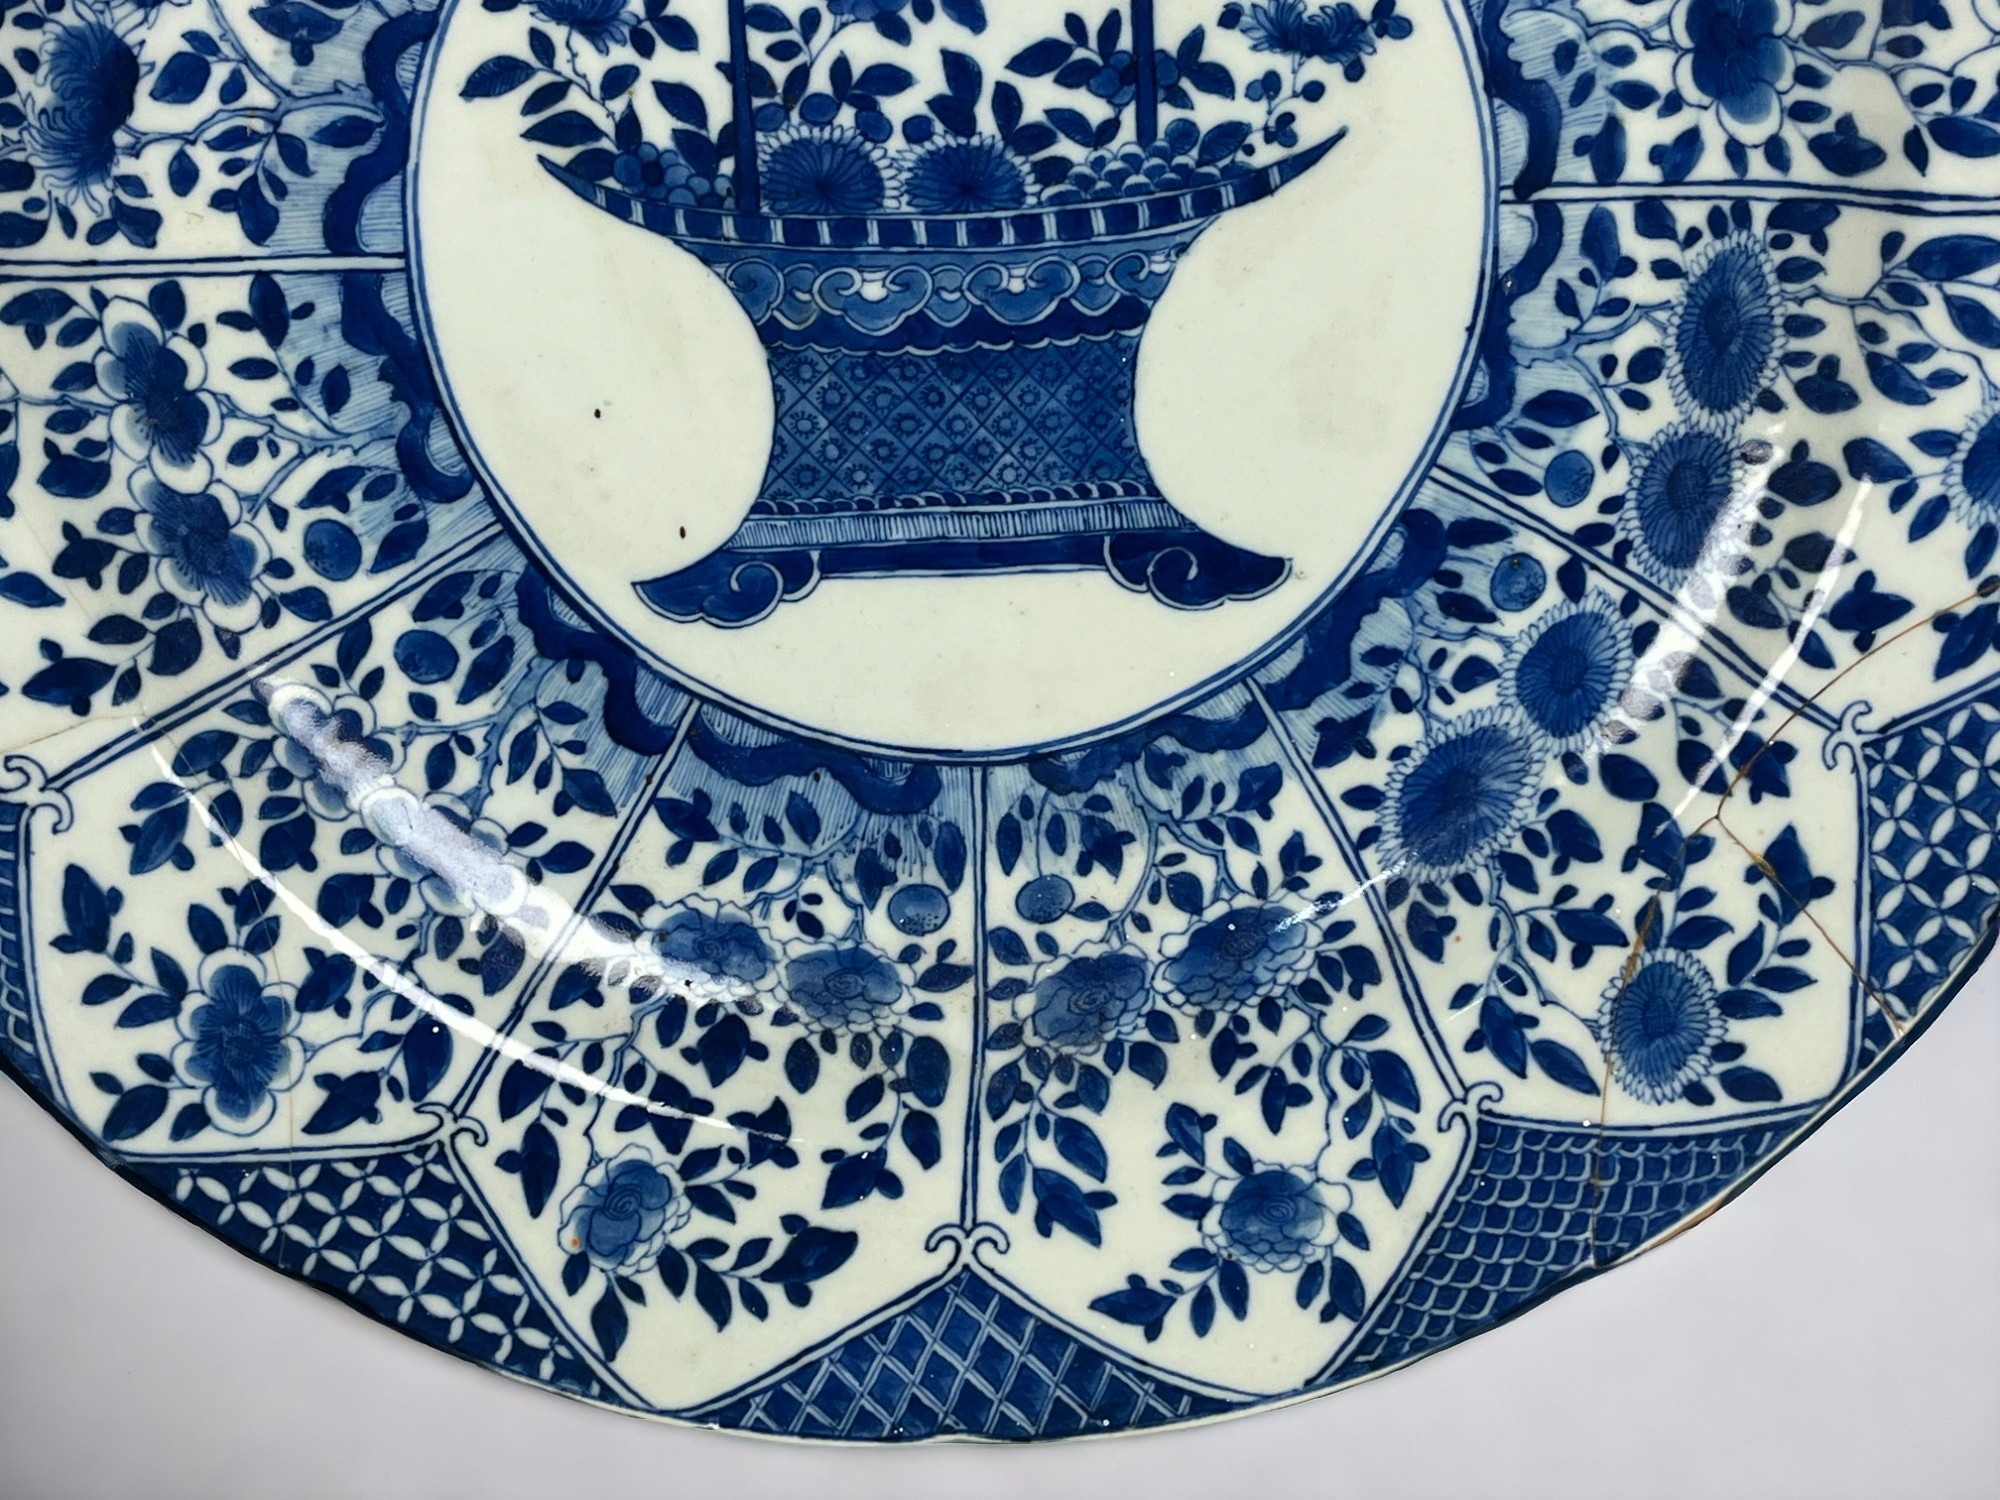 A large Chinese porcelain 'Flower basket' blue & white charger Qing dynasty, Kangxi period. - Image 4 of 5